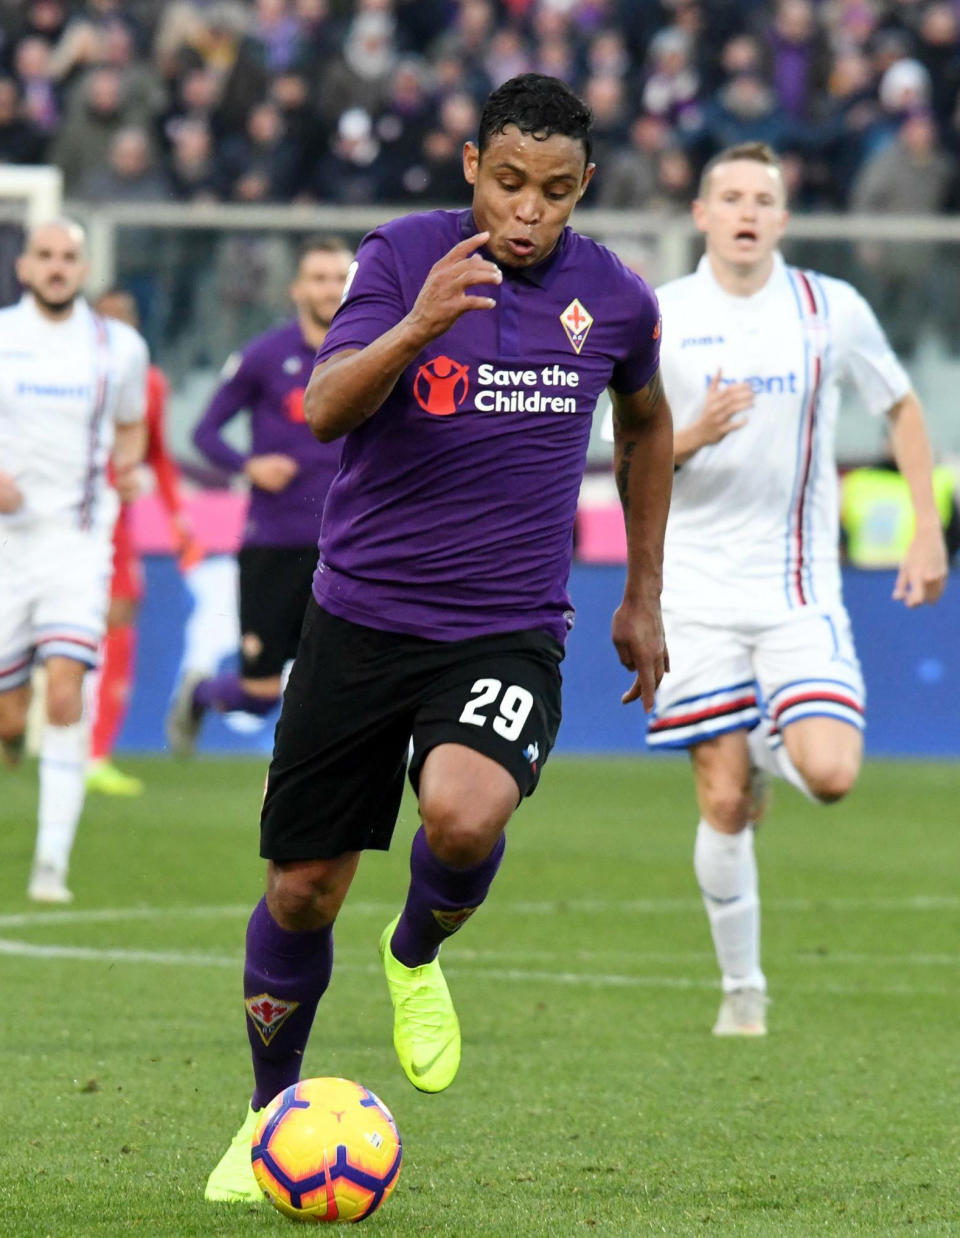 Fiorentina's forward Luis Muriel controls the ball during a Serie A soccer match between Fiorentina and Sampdoria at the Artemio Franchi stadium in Florence, Italy, Sunday, Jan. 20, 2019. (Claudio Giovannini/ANSA via AP)